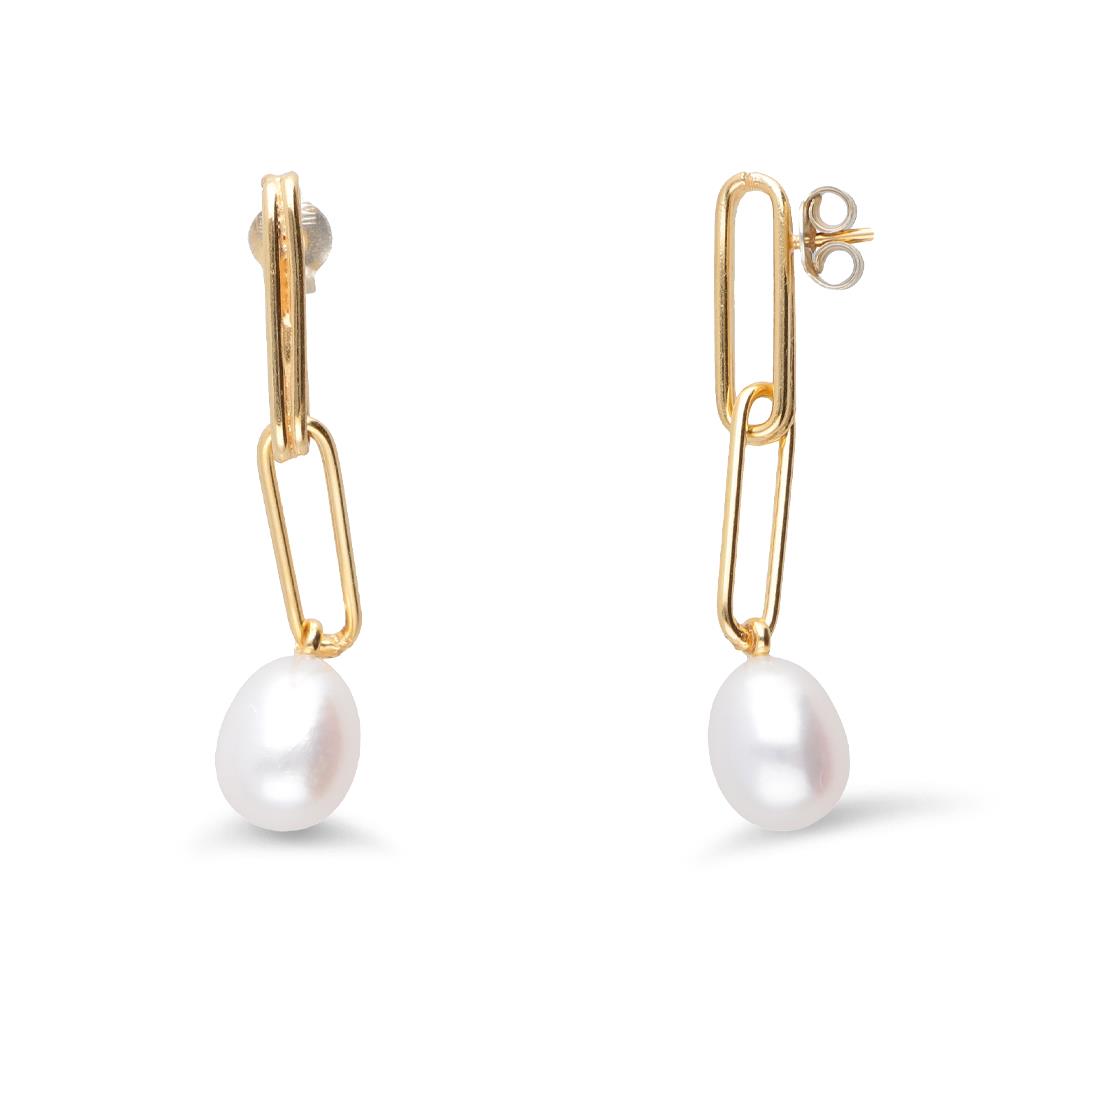 Earrings with silver chain and teardrop pearls - MAYUMI